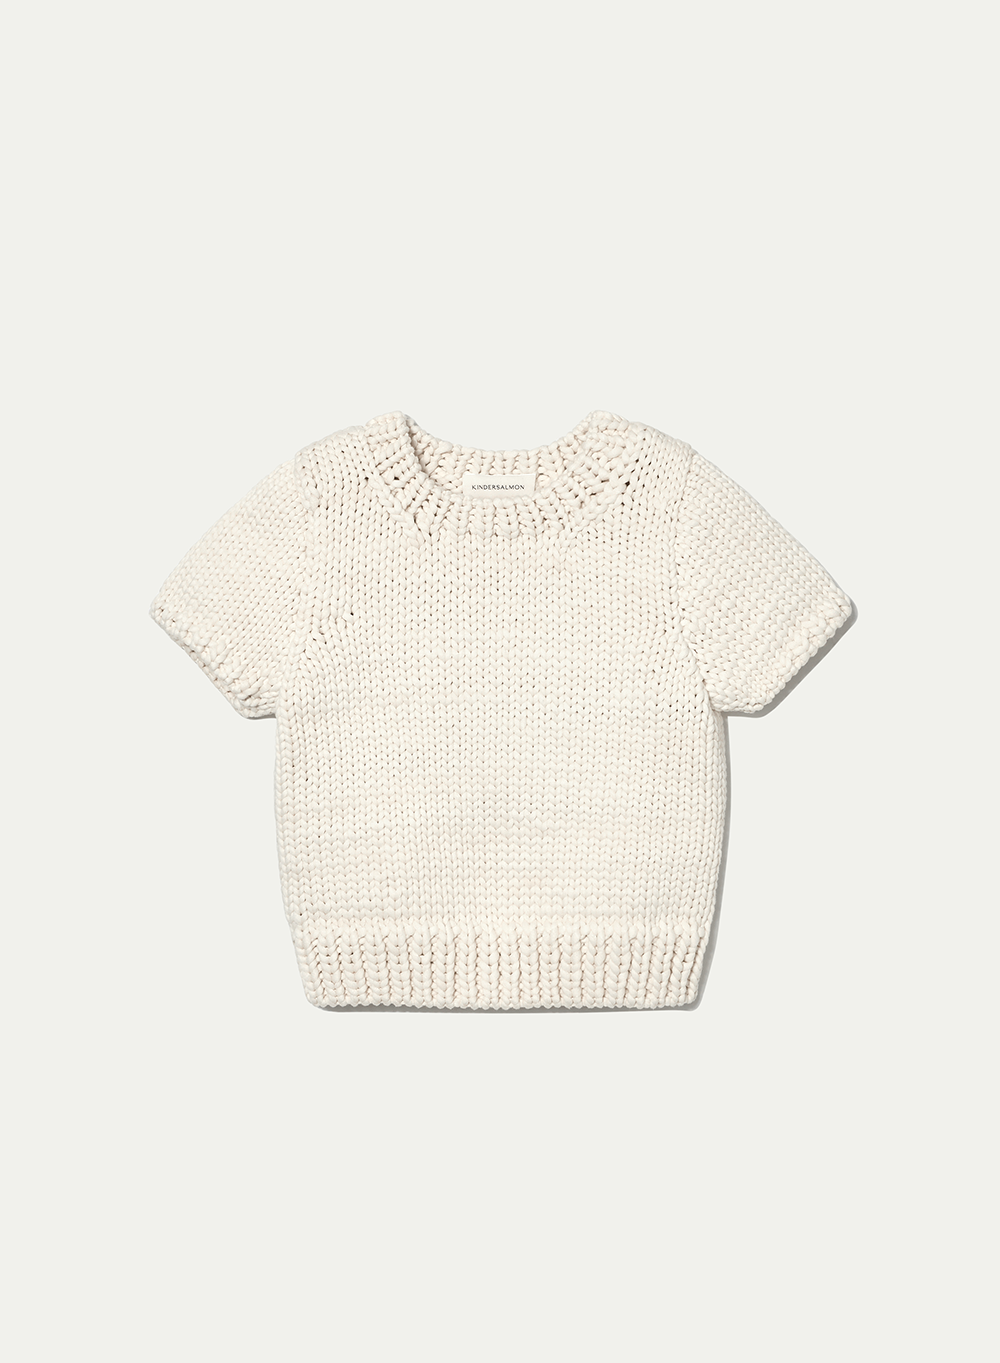 [ESSENTIAL] Hand-made Bulky Knitted Top Ivory